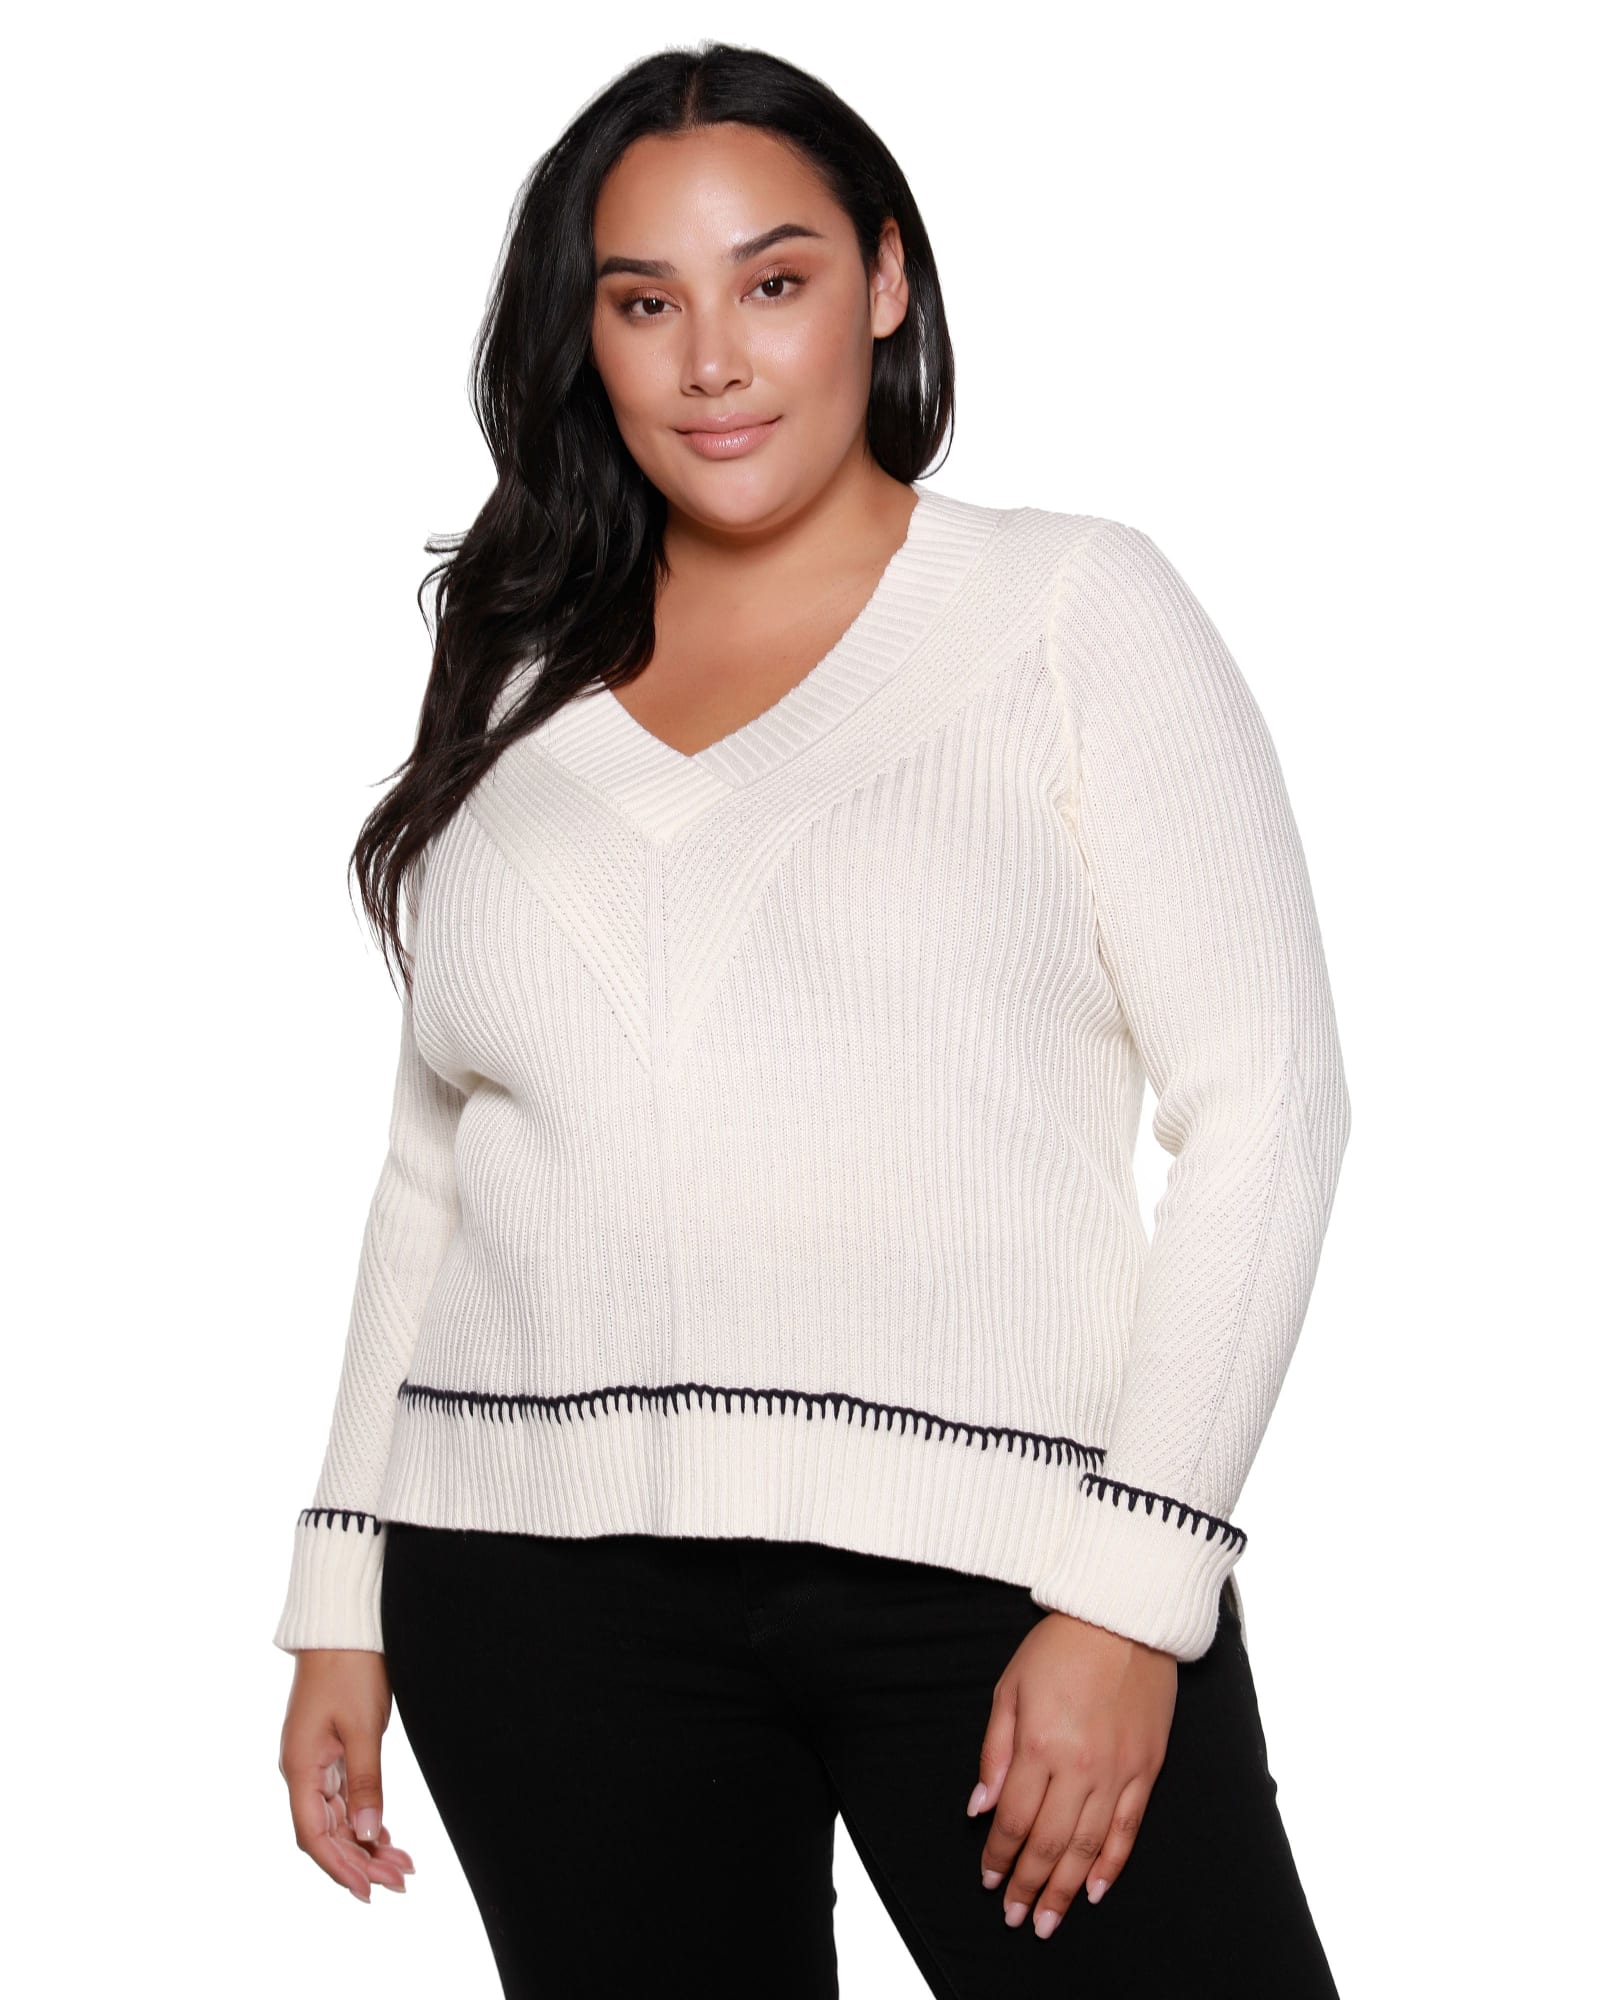 Plus Size Crossover V-Neck Sweater with Cuffed Sleeves | Winter White/Navy